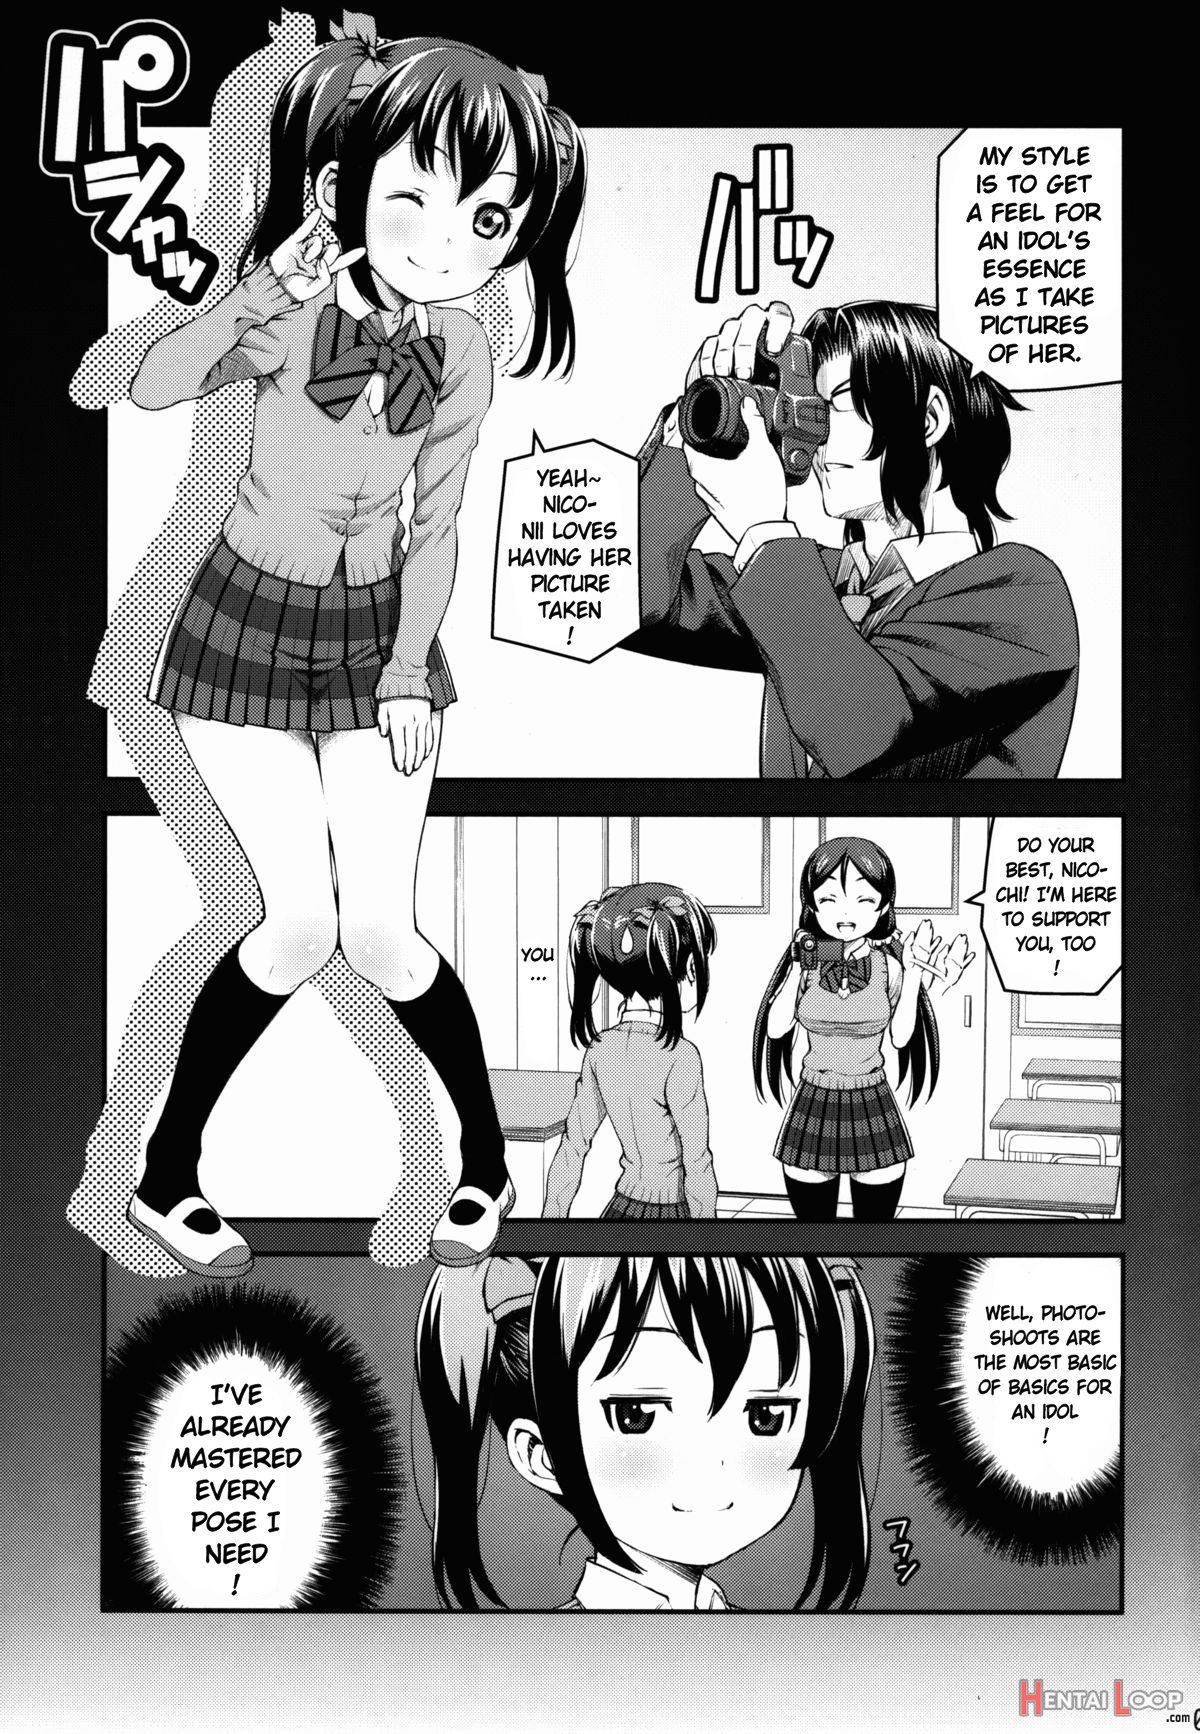 Luvnico page 9